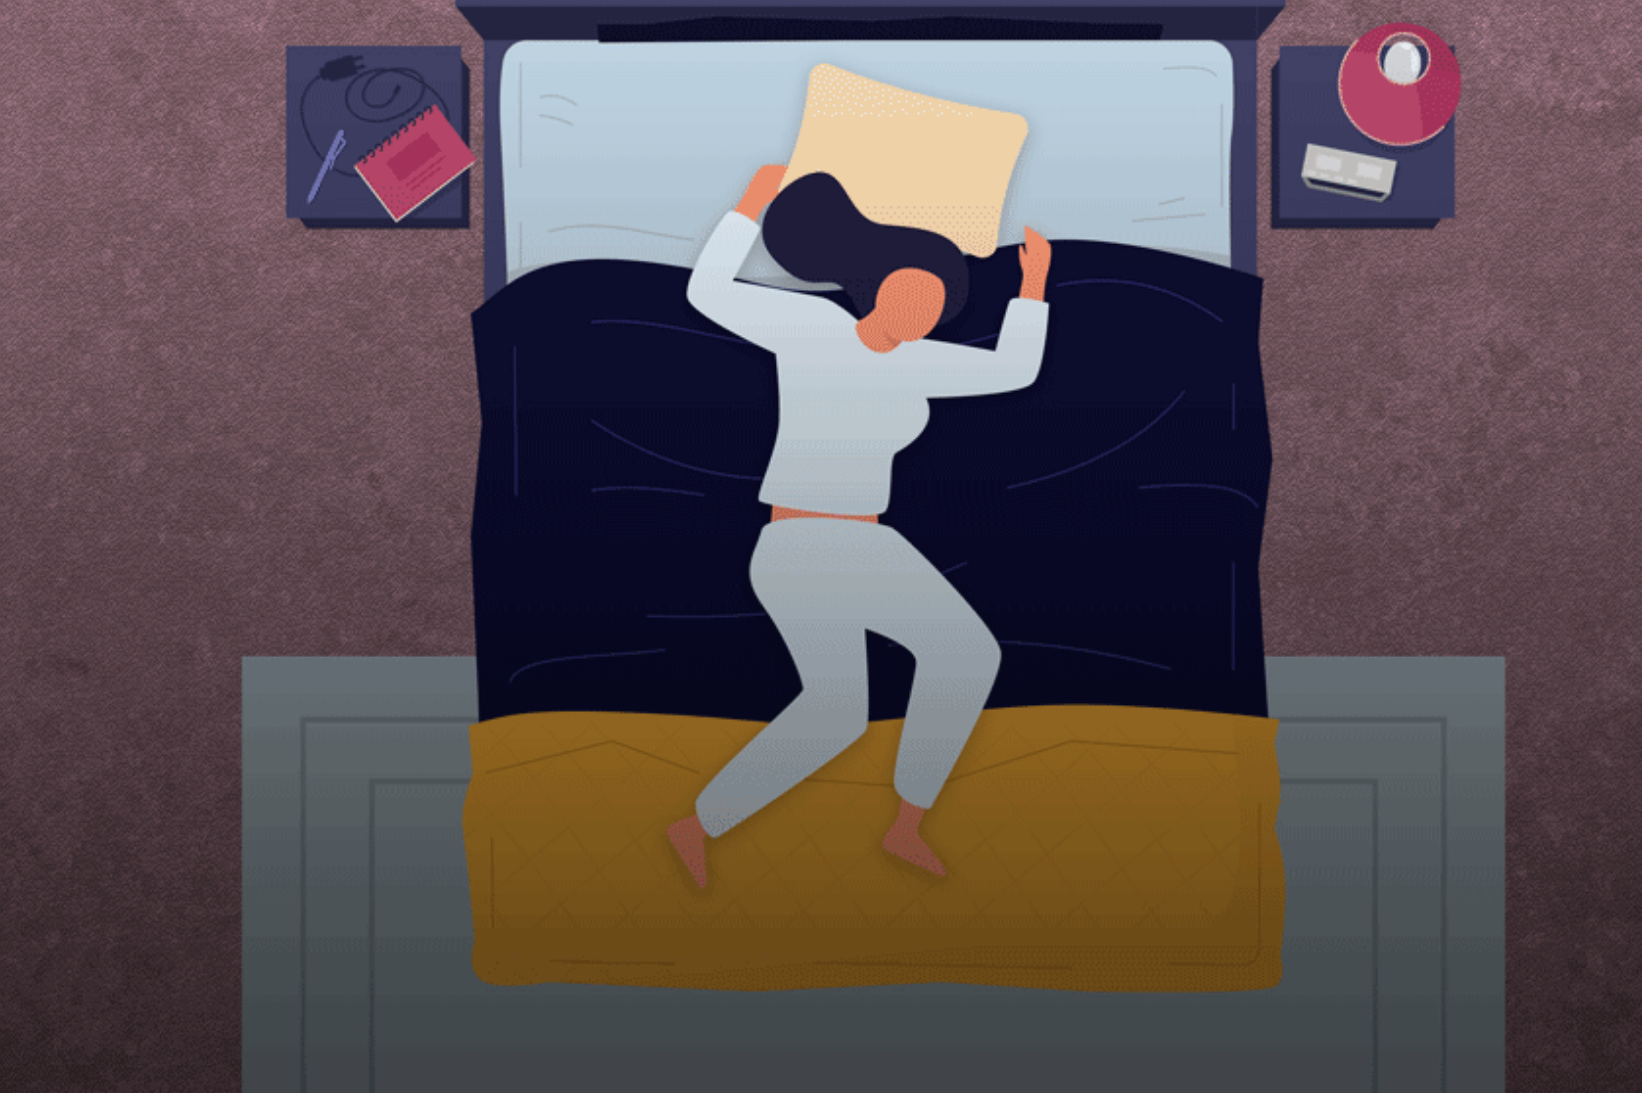 Monitoring sleep positions for a healthy rest | MIT CSAIL